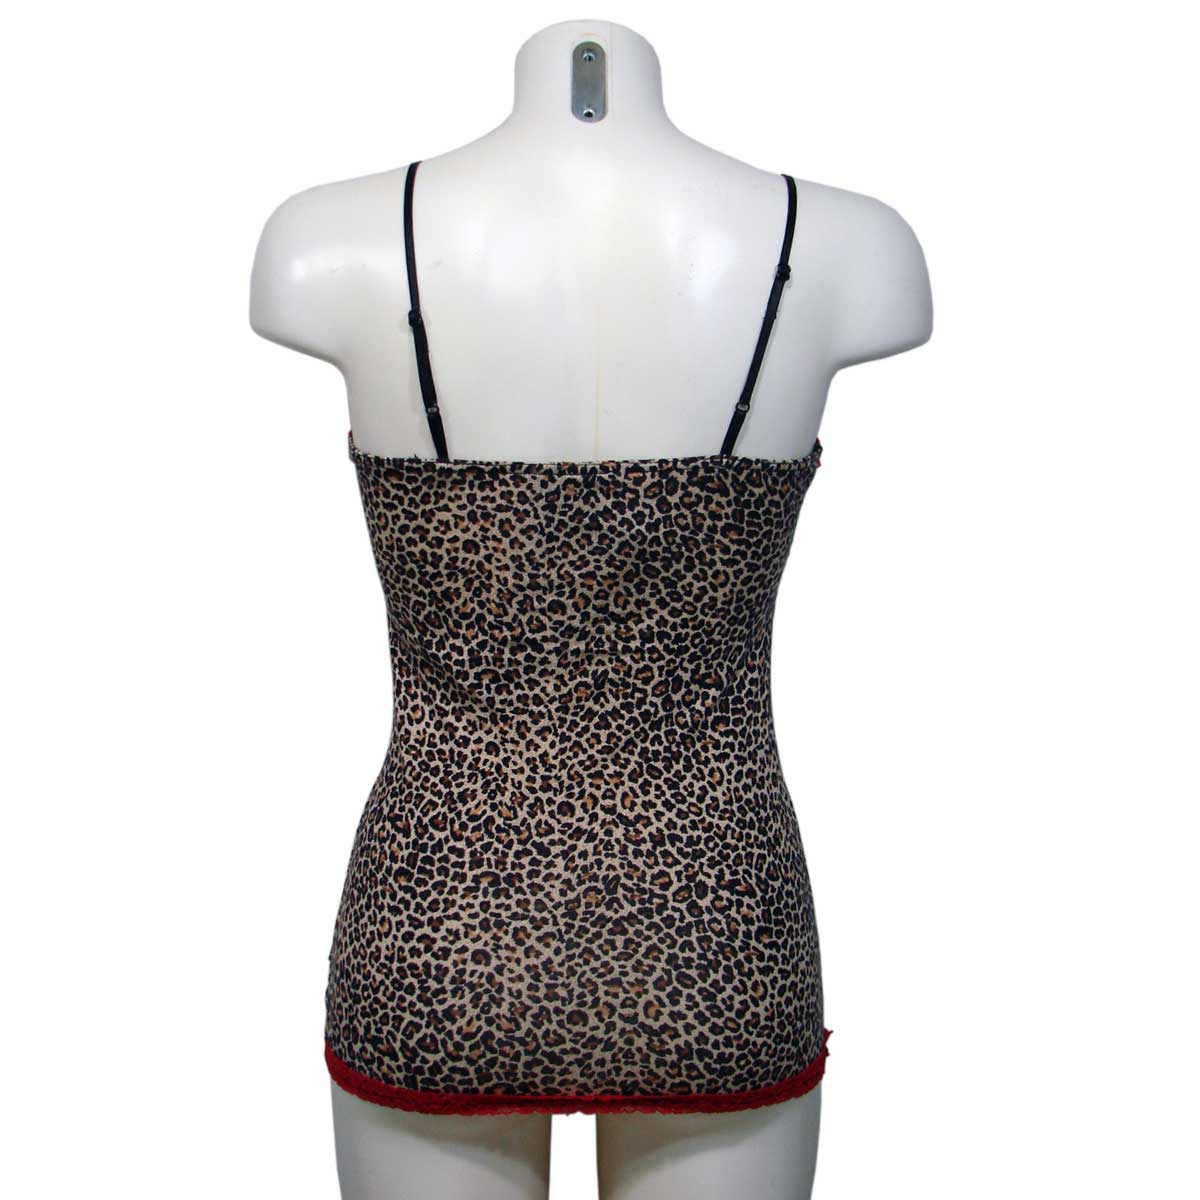 Woman's Leopard Spaghetti Strap Top By Queen of Darkness